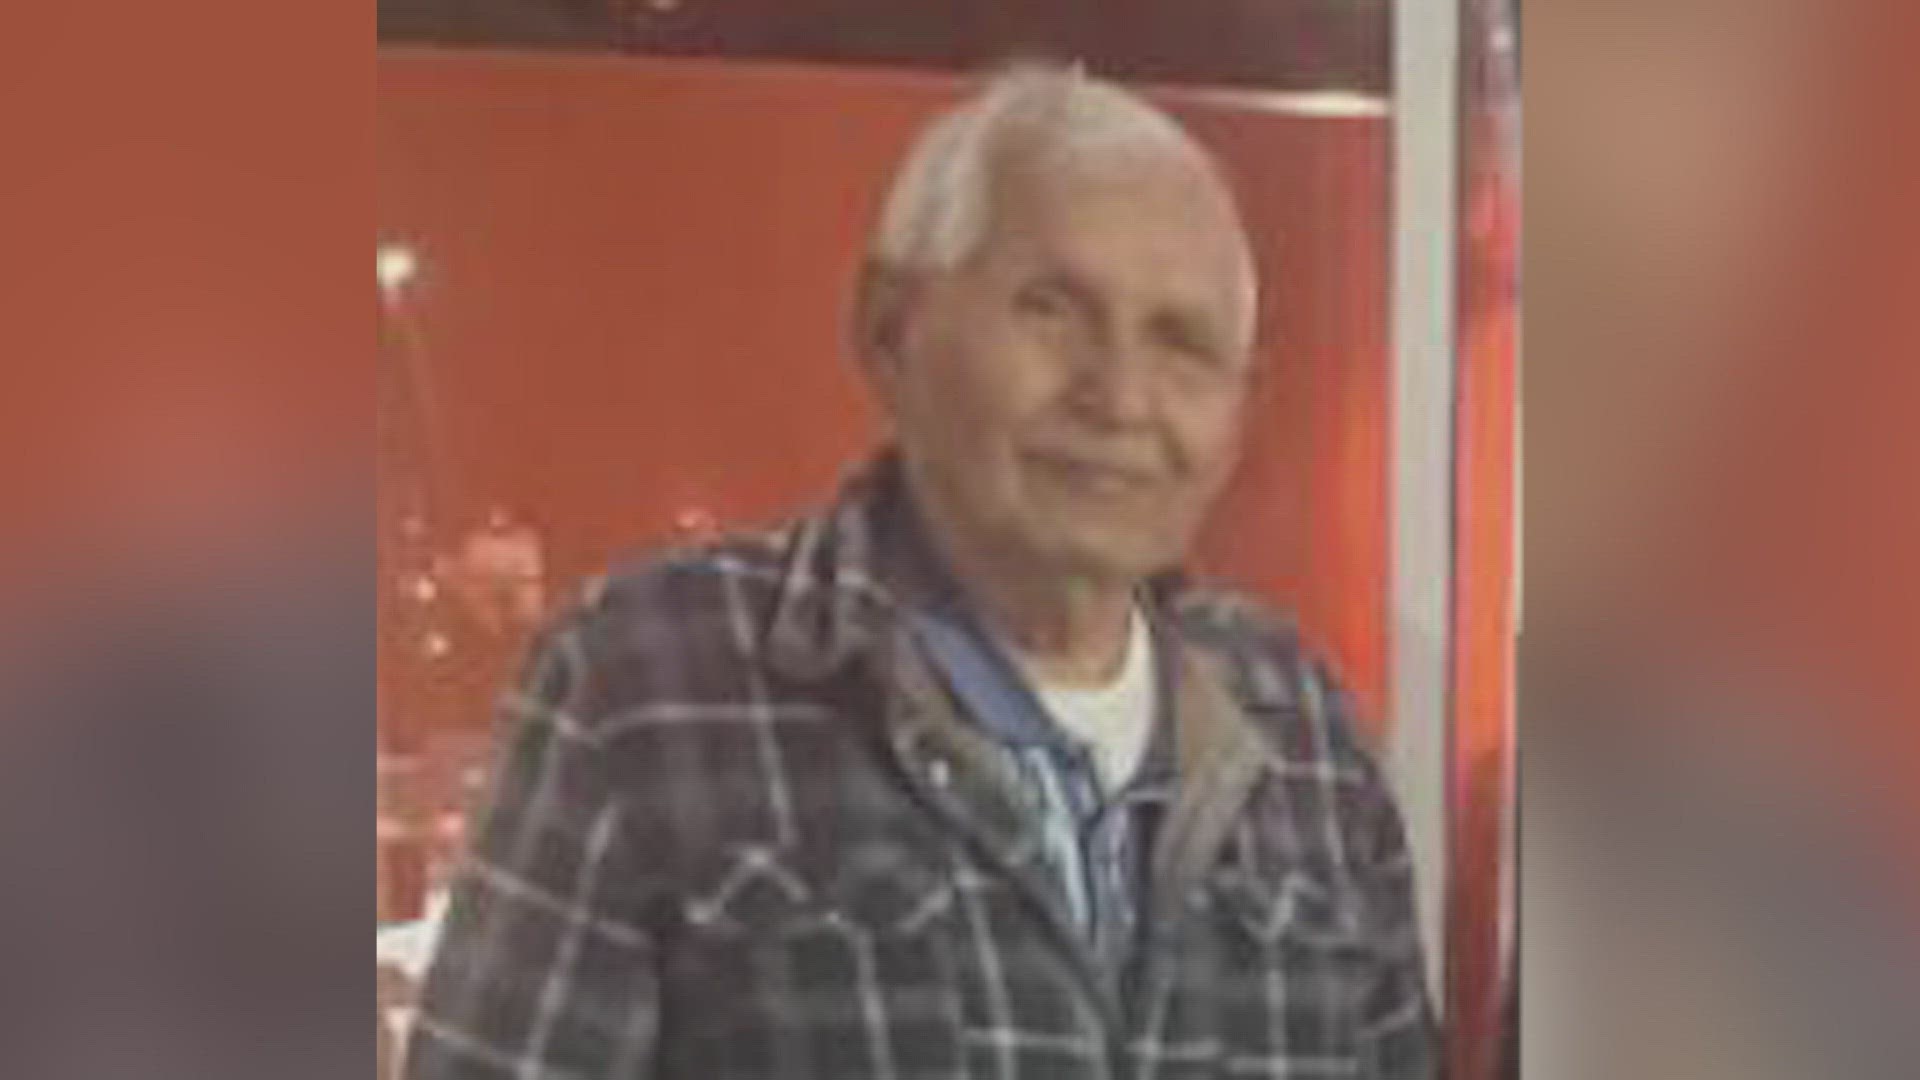 Francisco Duran was last seen in Brownsville on Saturday at 10:30 p.m.